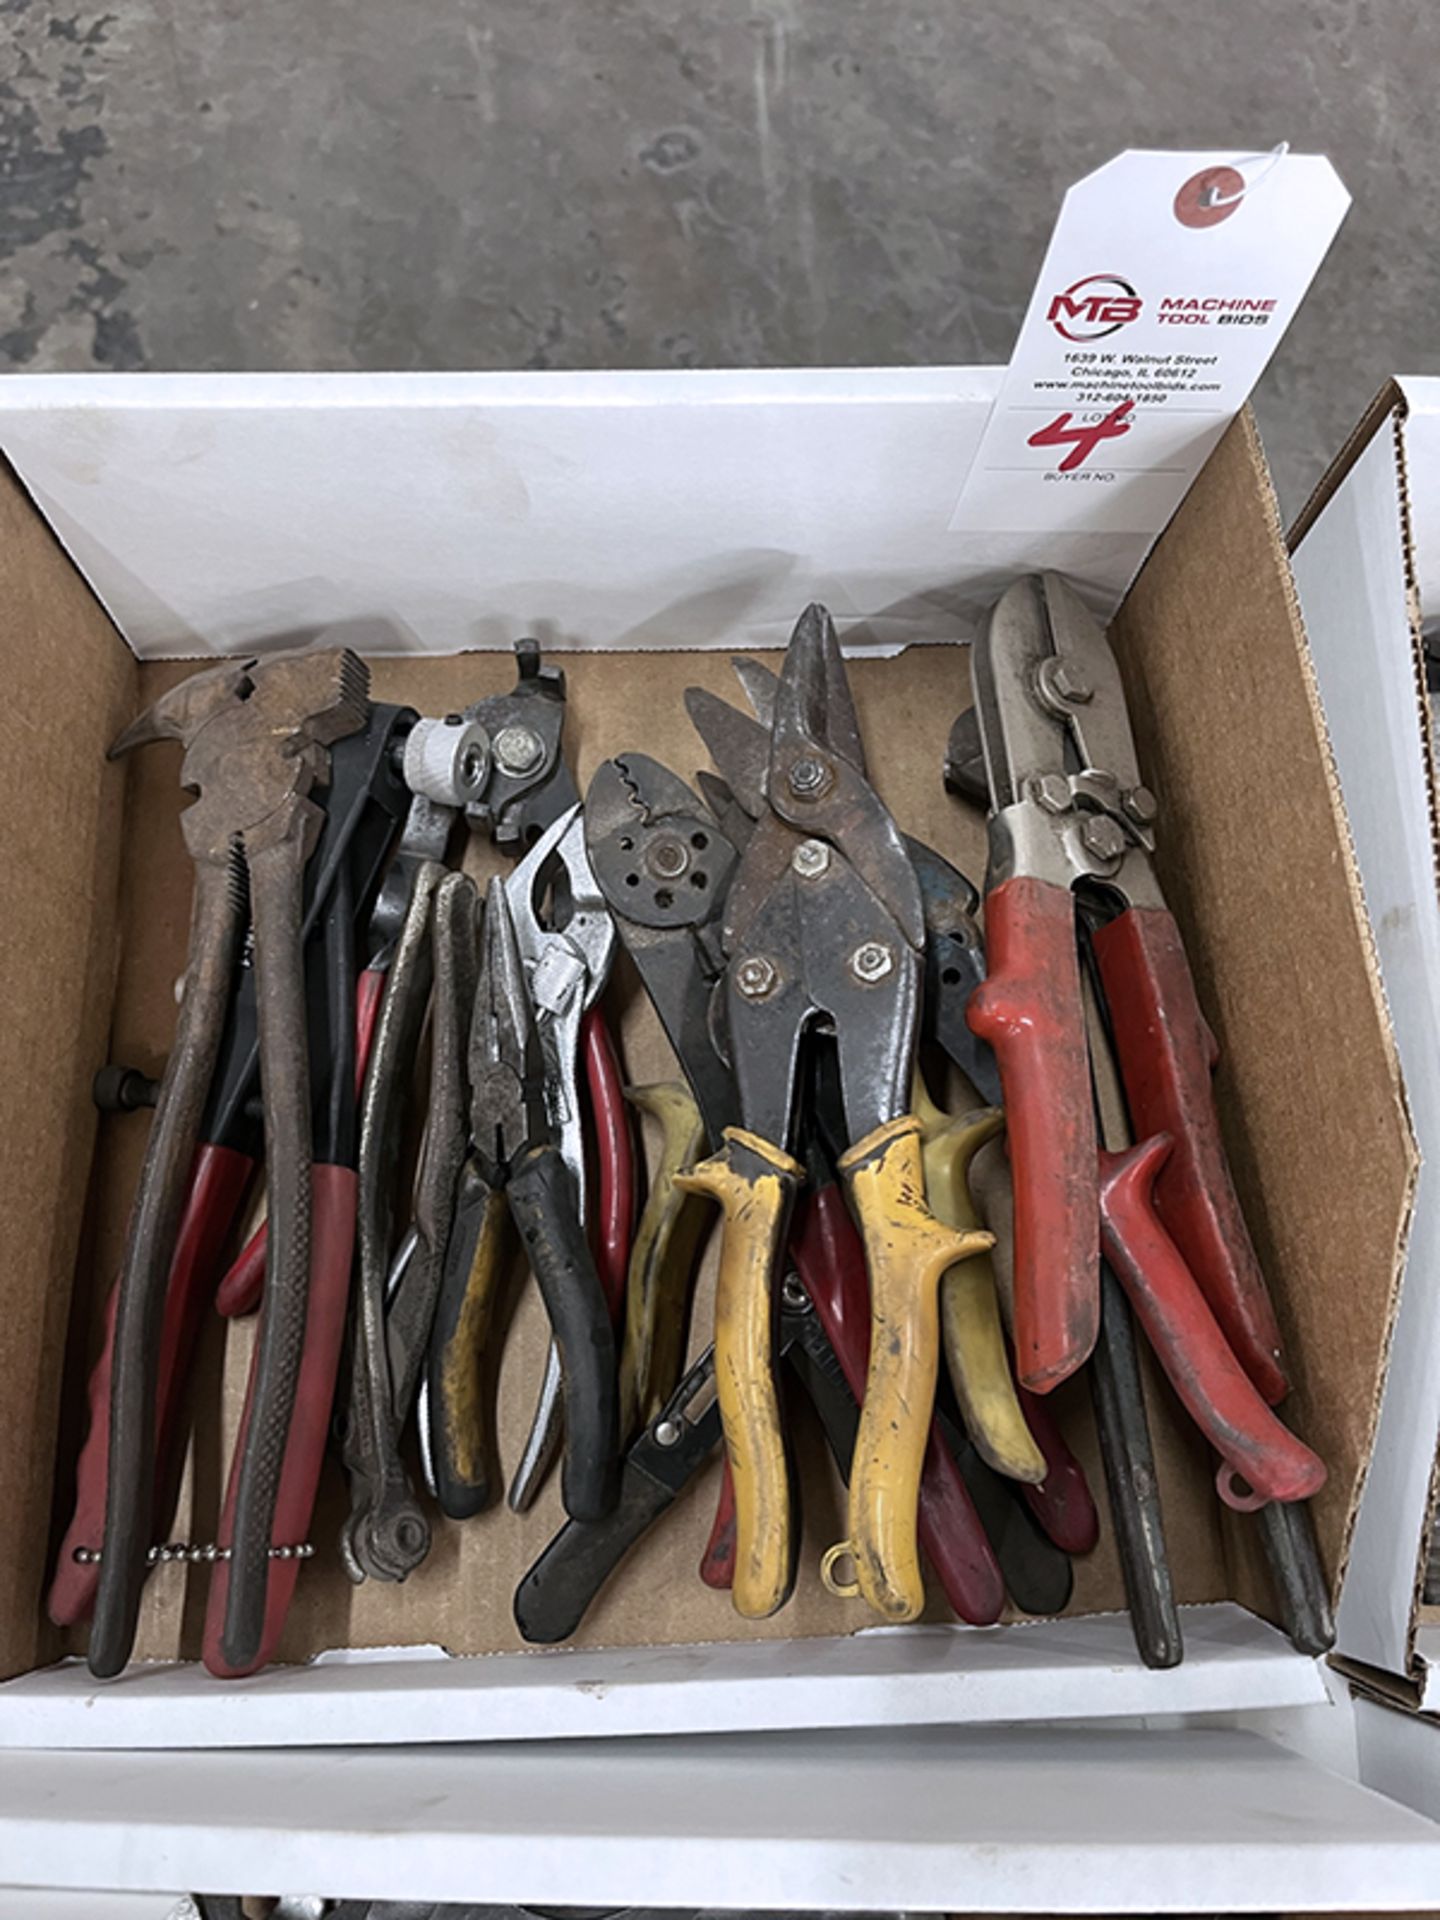 Assortment of Snips and Pliers